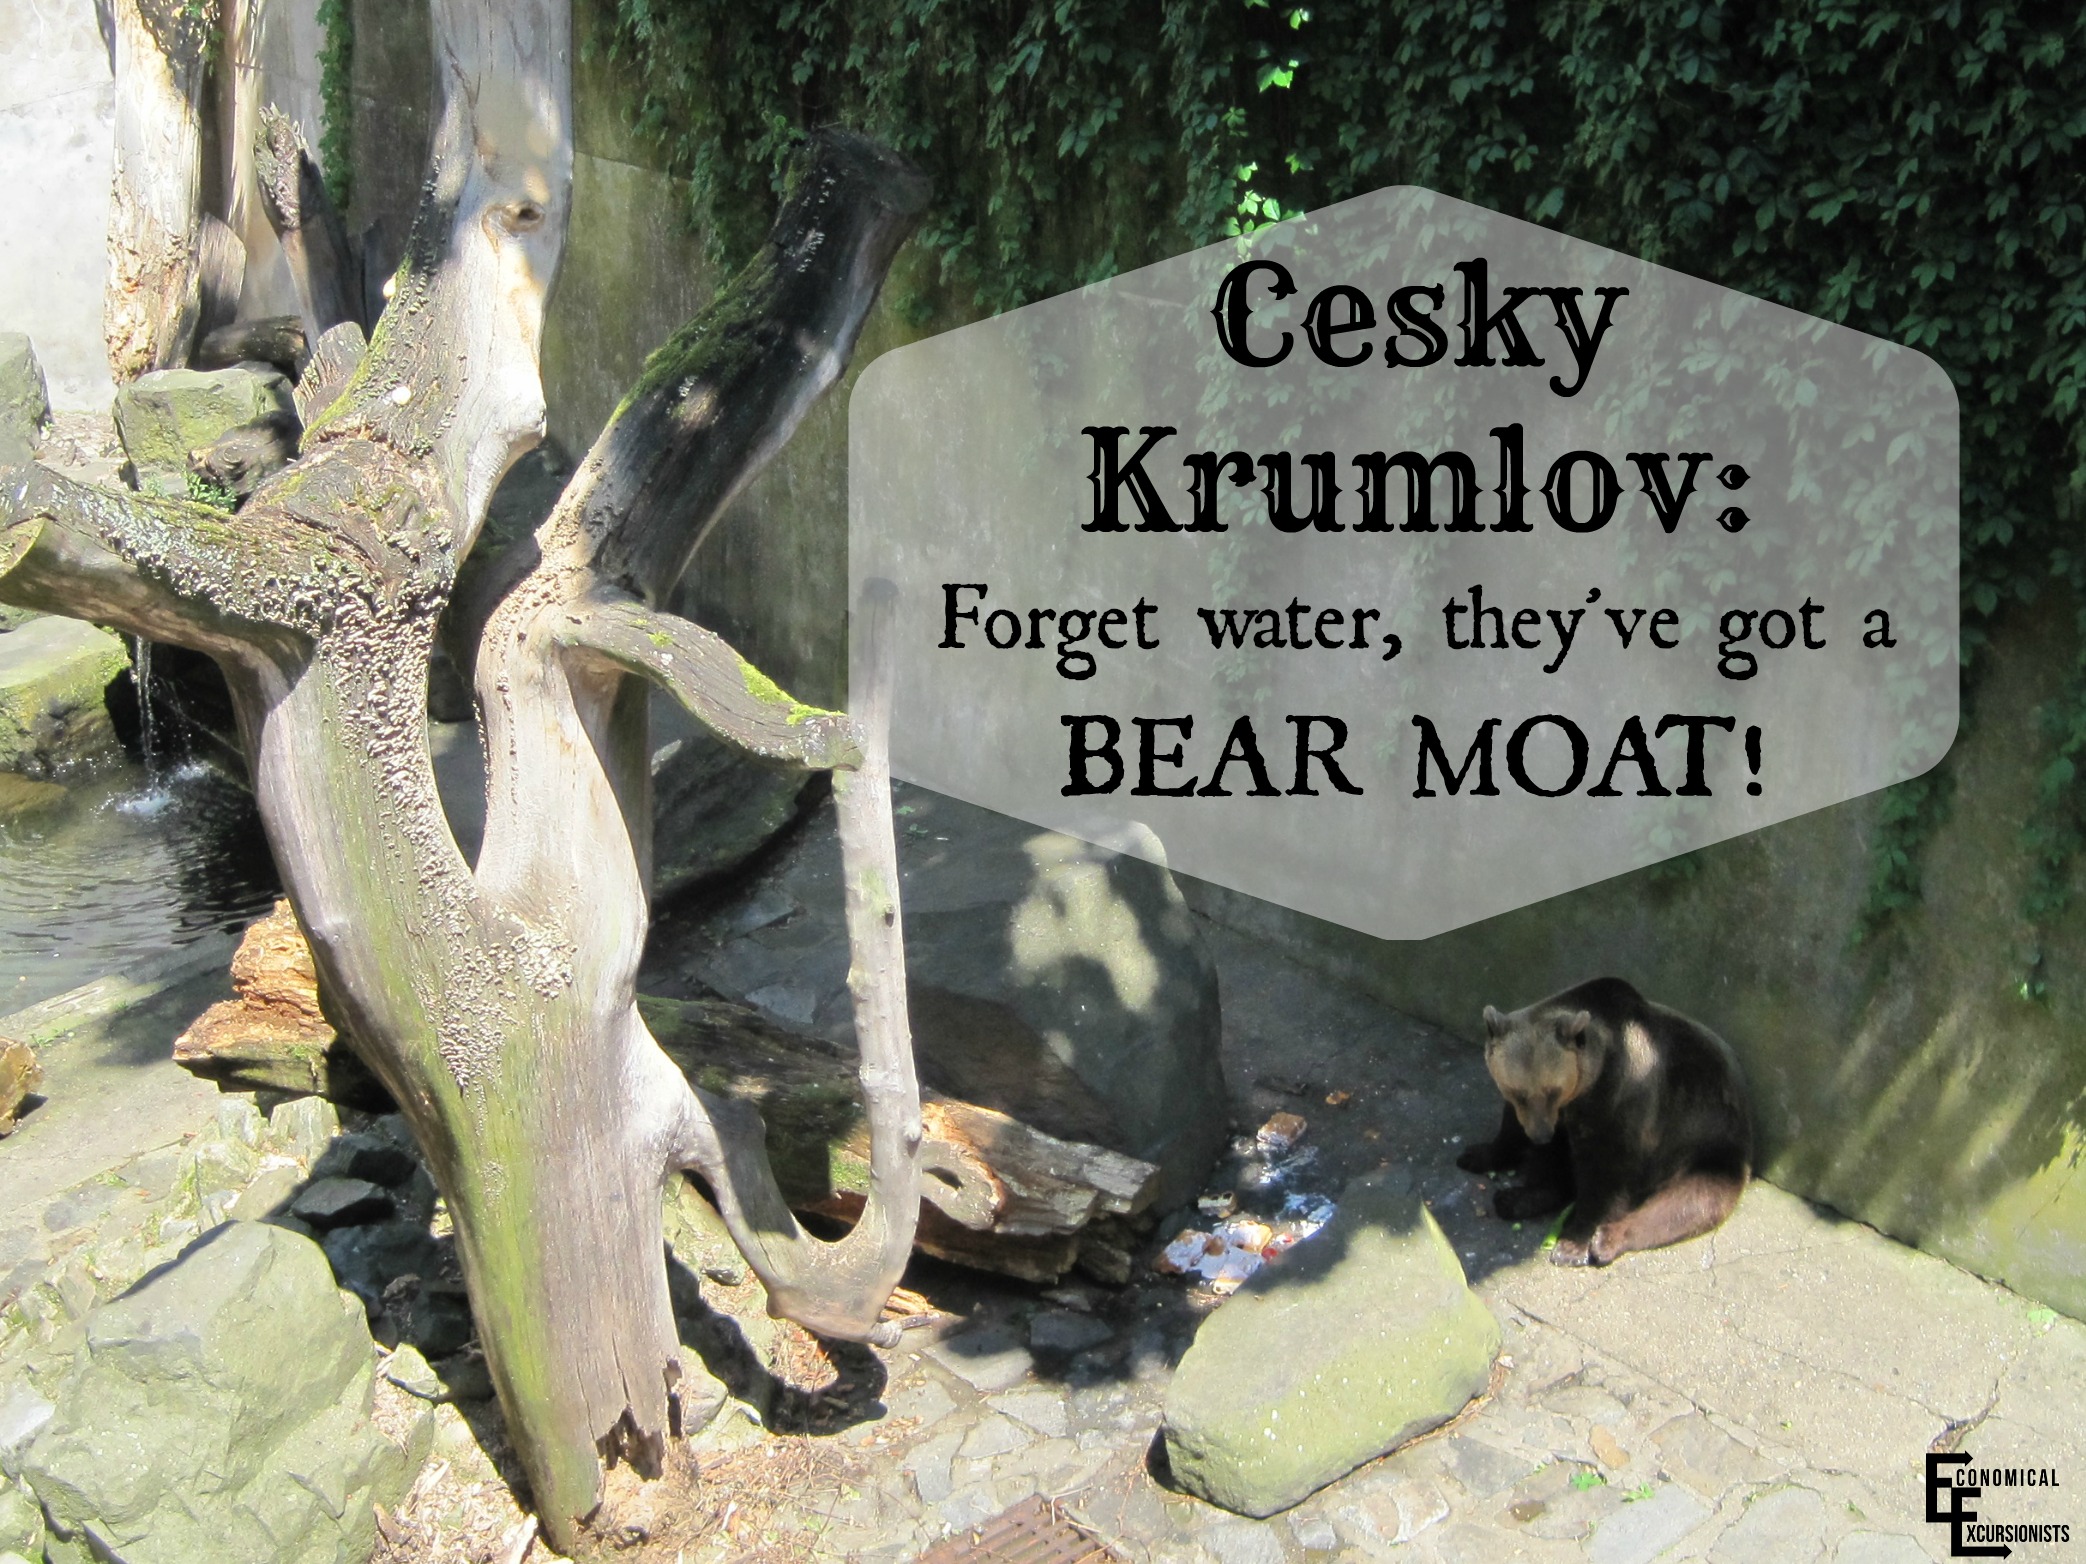 There are actually real bears instead of water in the castle moat!